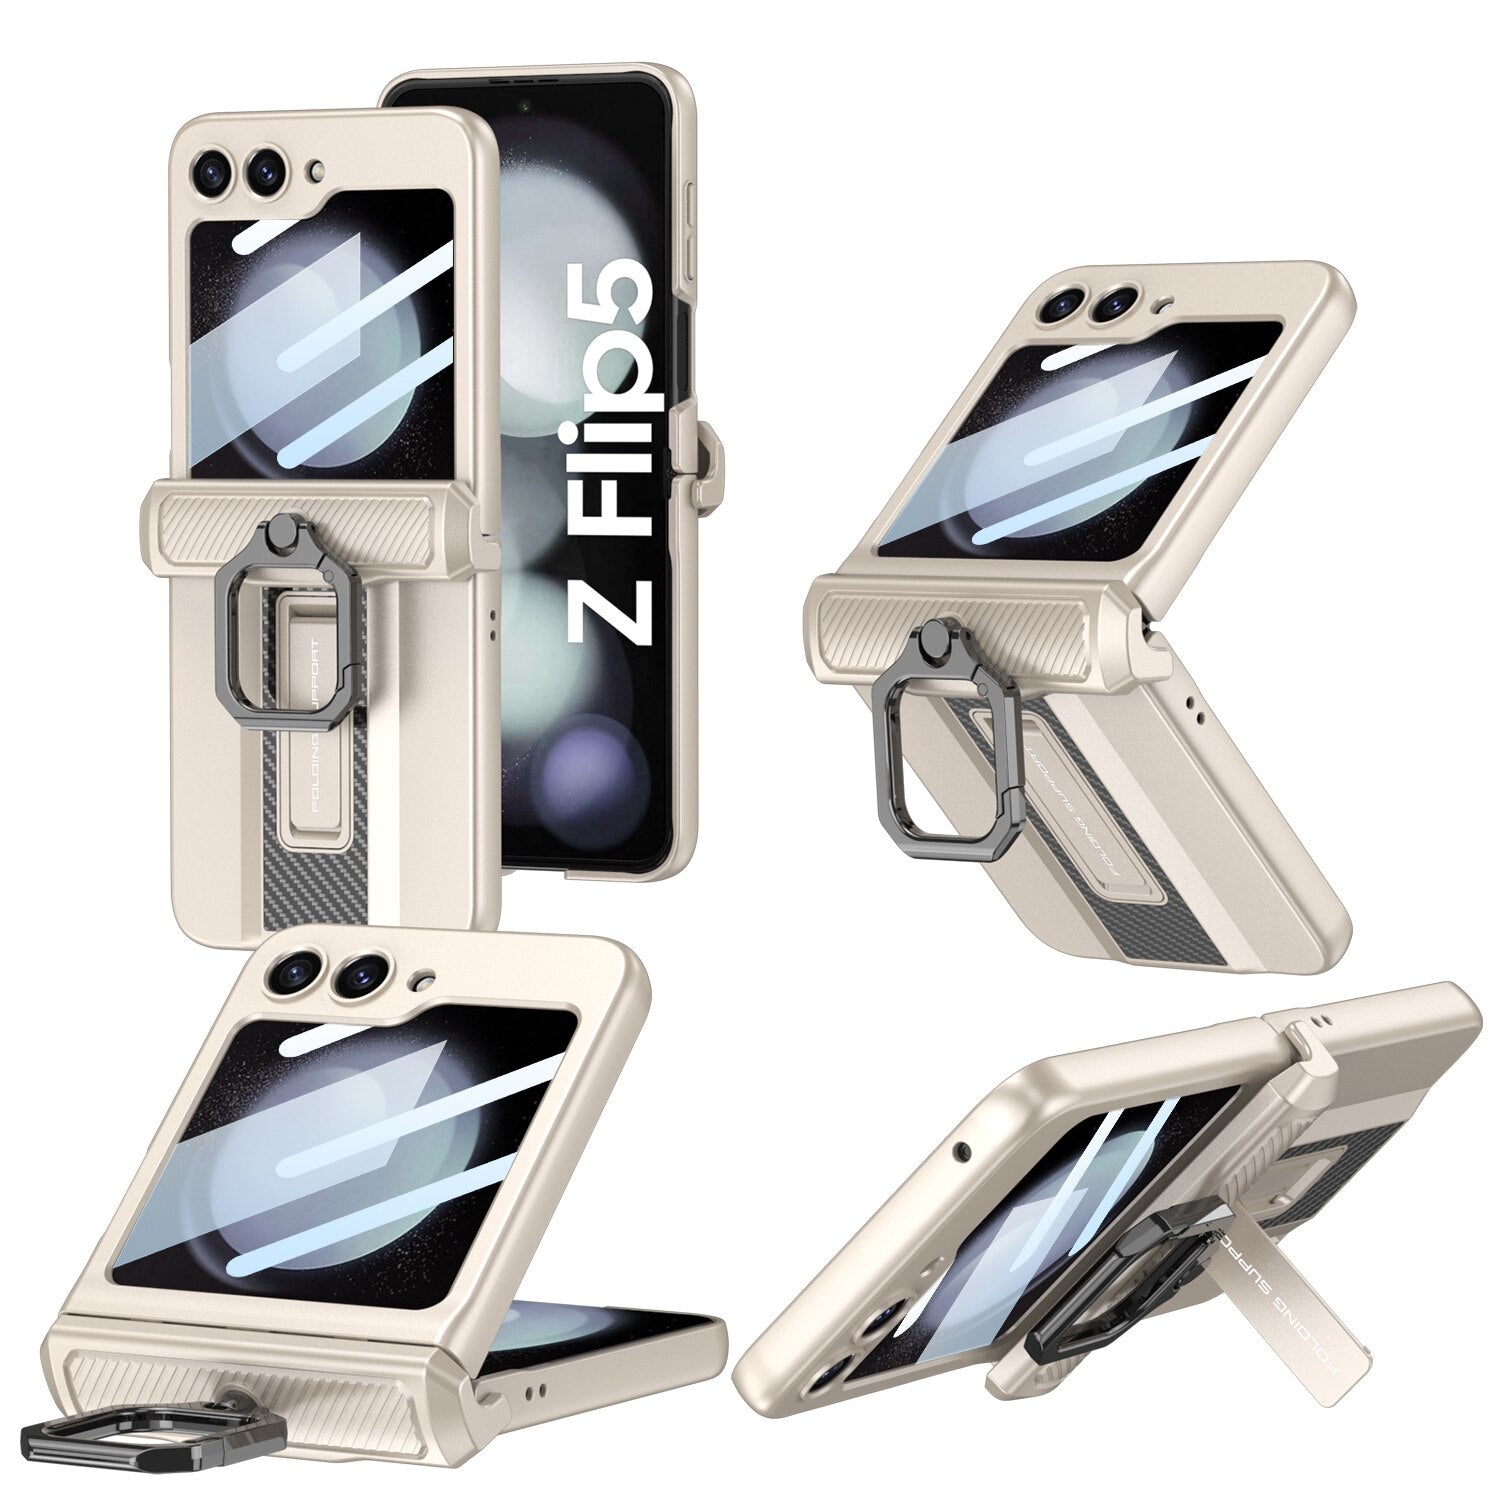 Armor Case with Ring Holder & Magnetic Hinge Protective For Samsung Galaxy Z Flip 5